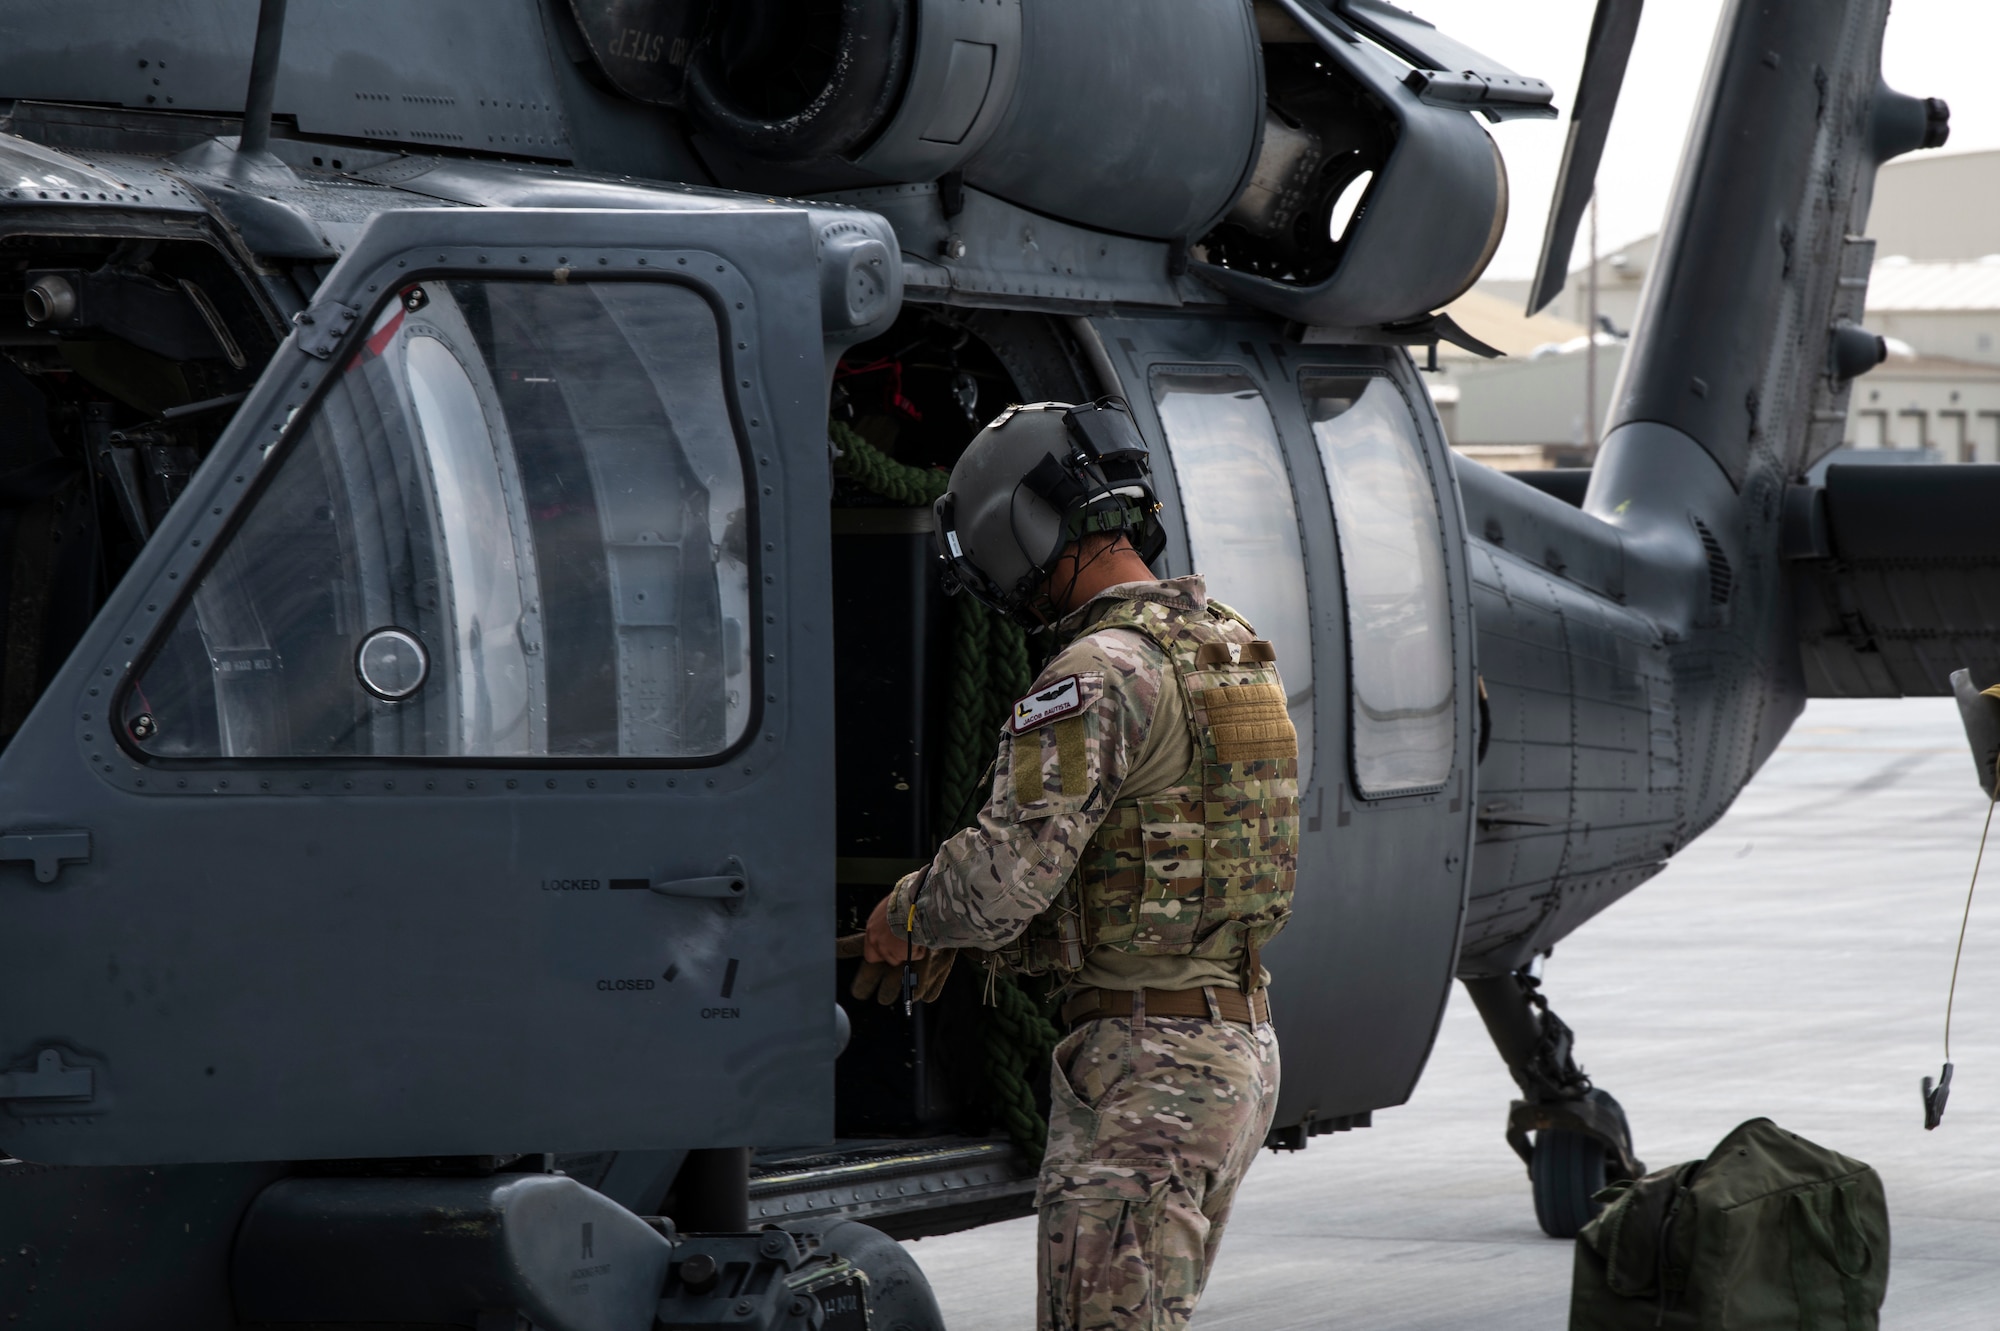 An aircrewmember of an U.S. Air Force HH-60G Pave Hawk from the 55th Rescue Squadron puts on gloves in preparation for a simulated rescue mission, Aug. 17, 2020, at Mountain Home Air Force Base, Idaho. The 55th RQS is participating in Gunfighter Flag 20-1, where it trains with joint and international partners to complete combat and rescue exercises. (U.S. Air Force photo by Airman 1st Class Andrew Kobialka)